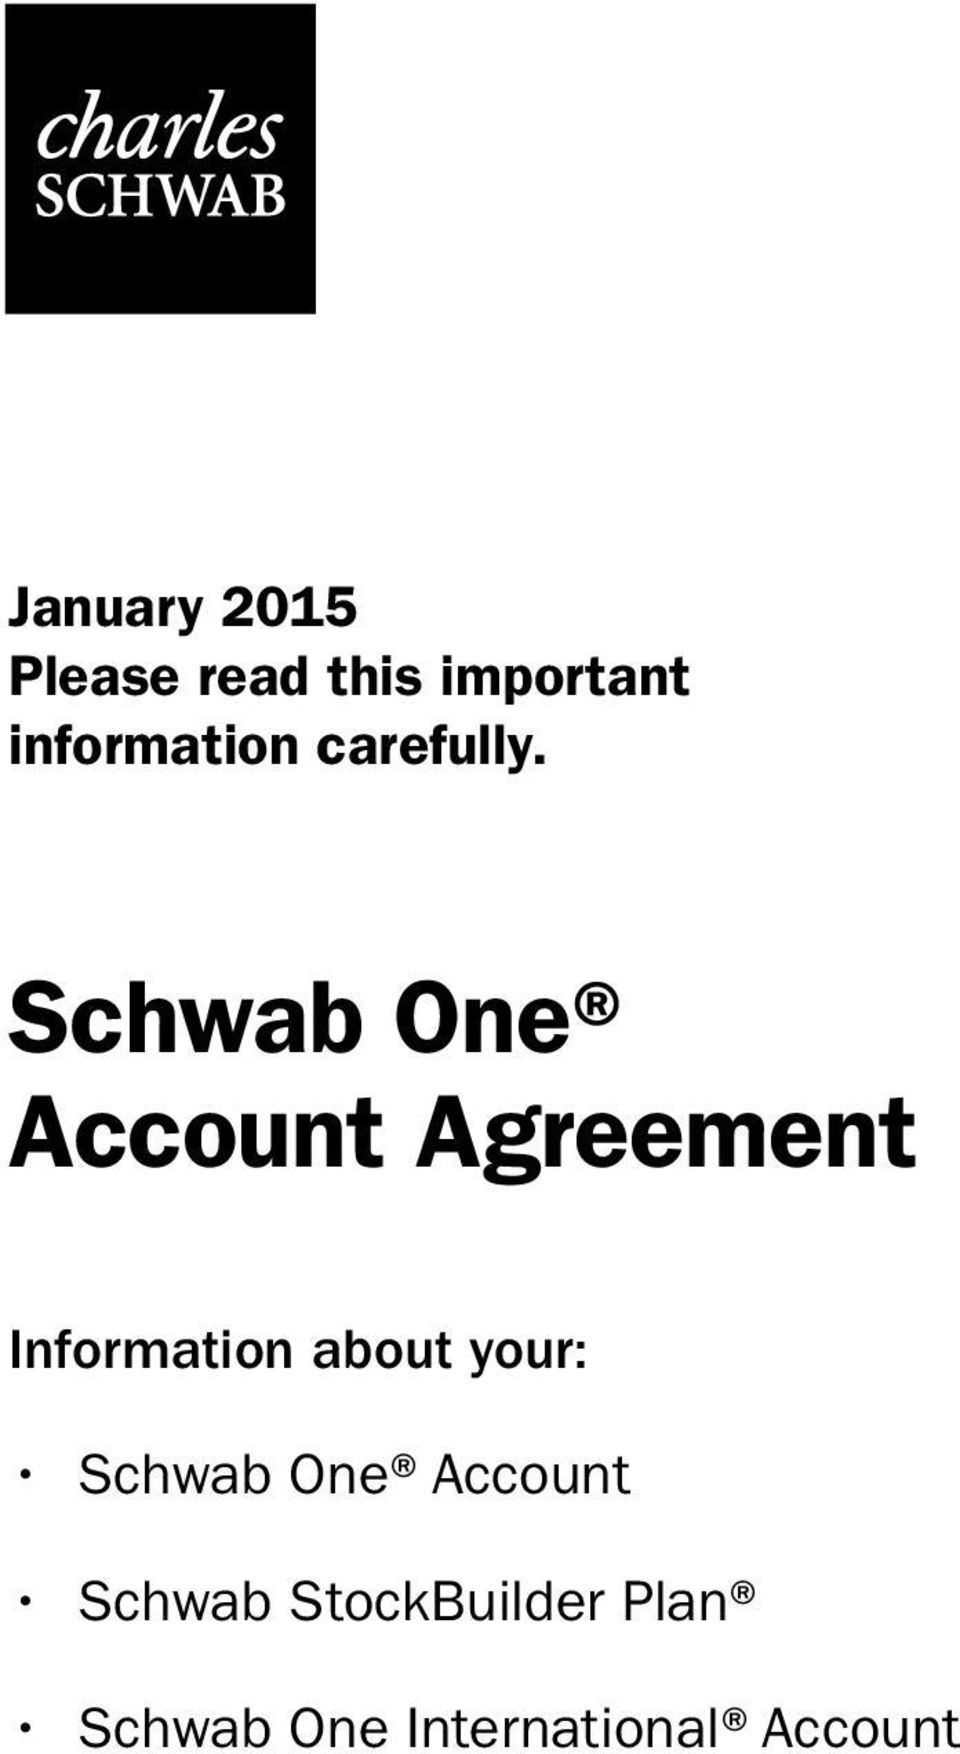 Schwab One Account Agreement Information about